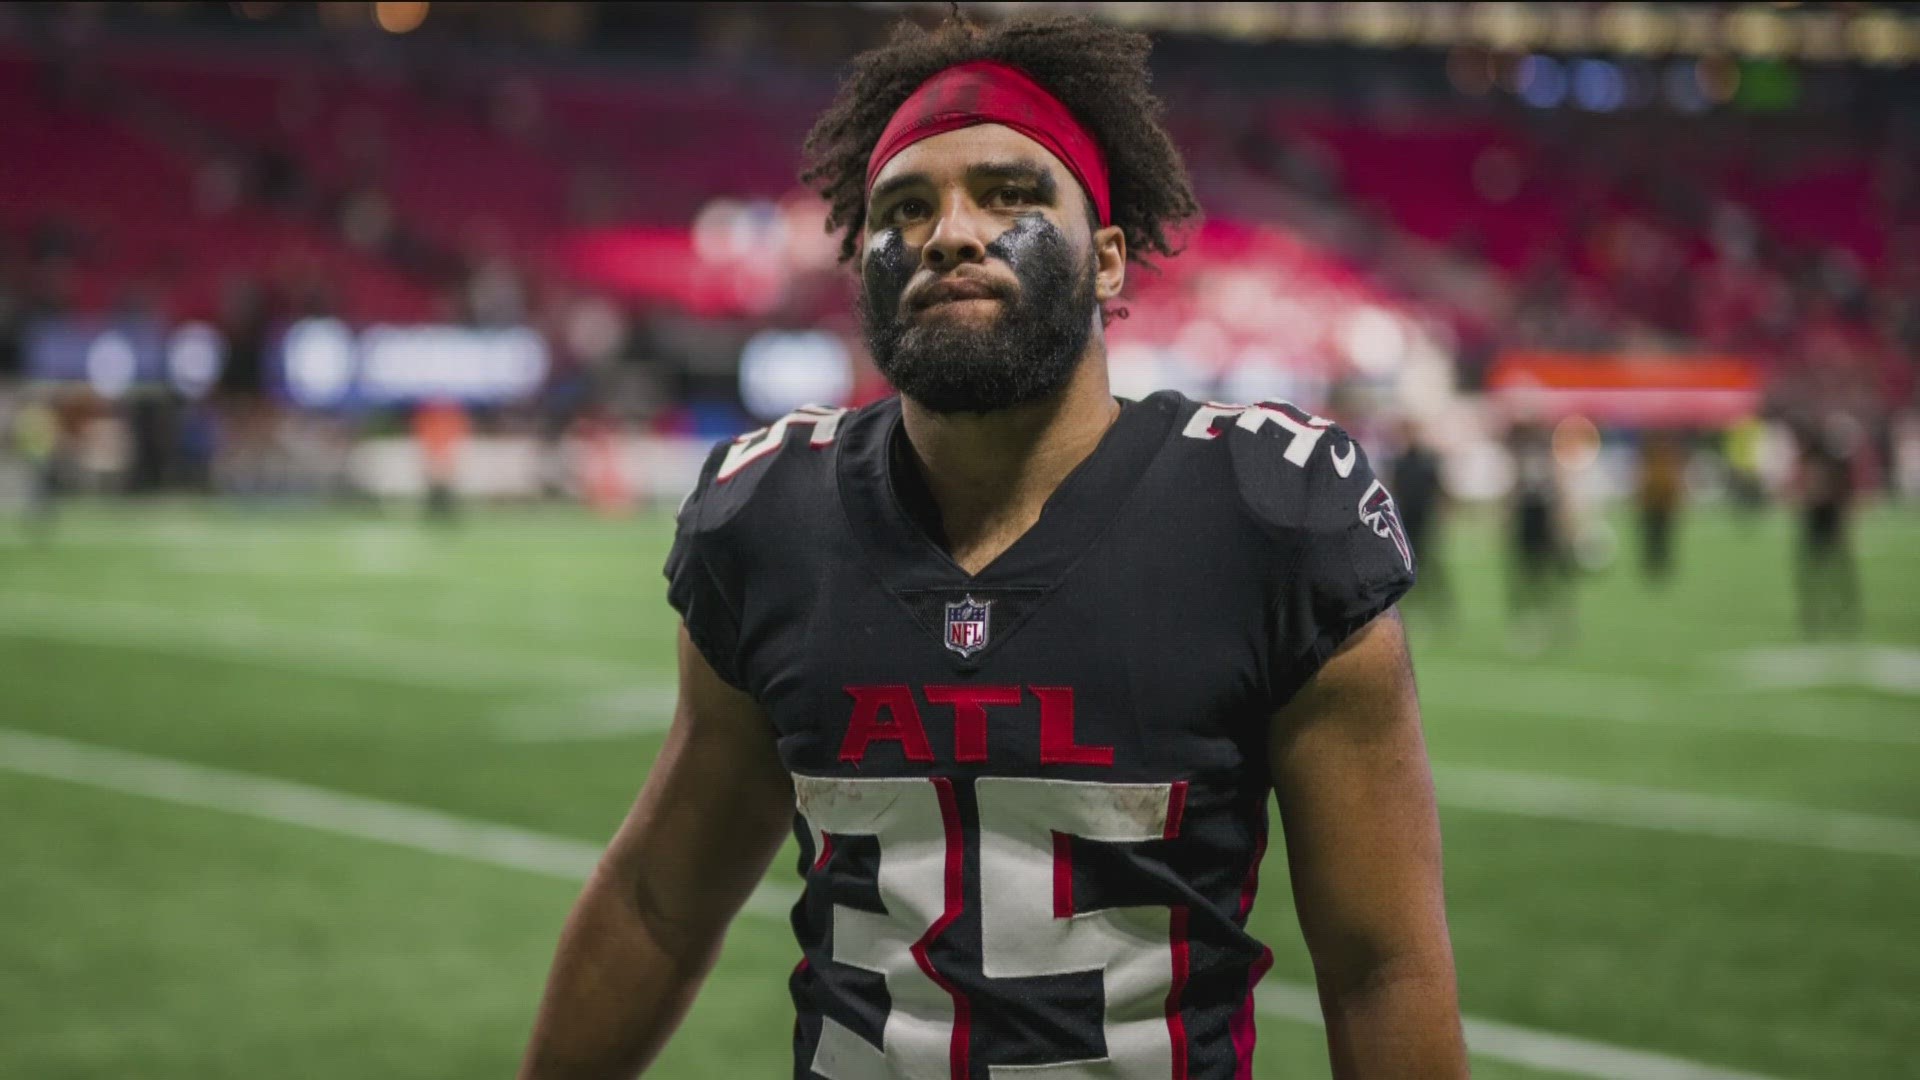 The versatile Atlanta Falcon and former Bronco is expected to have season-ending surgery on Thursday to repair a torn anterior cruciate ligament.